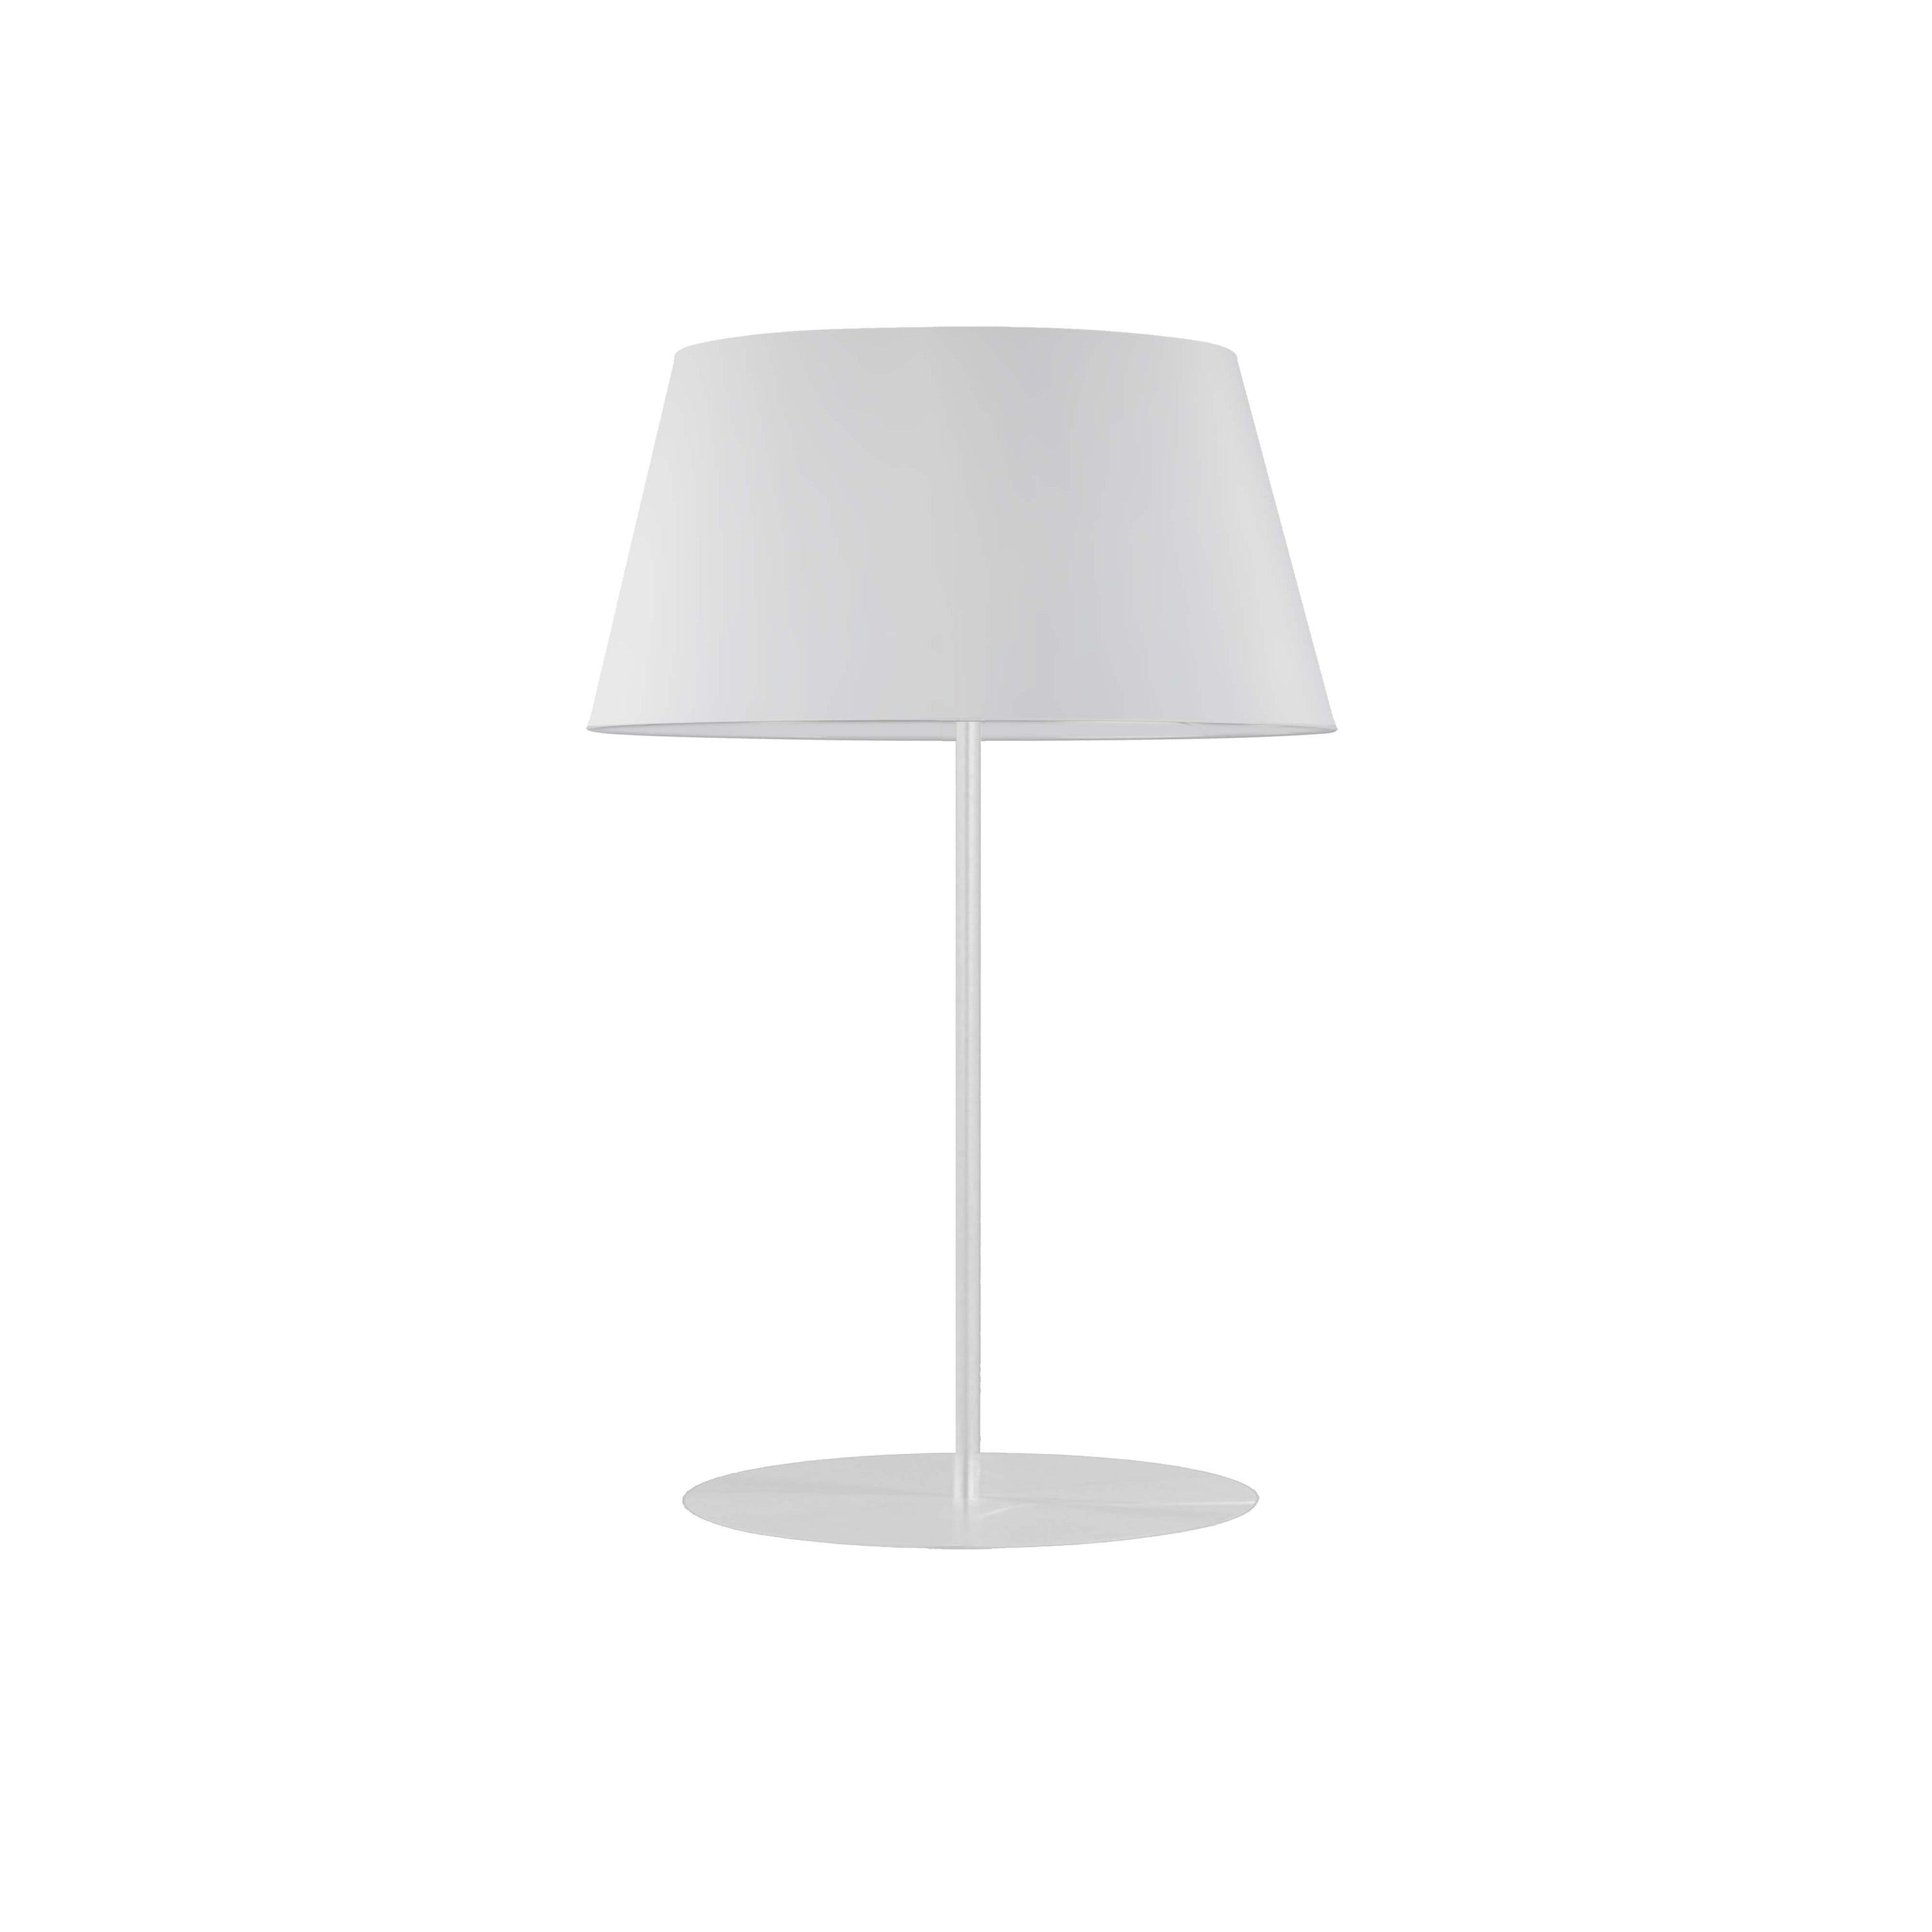 Dainolite GTC-R281T-MW-WH 1 Light Incandescent Round Base Table Lamp Matte Black with White Shade